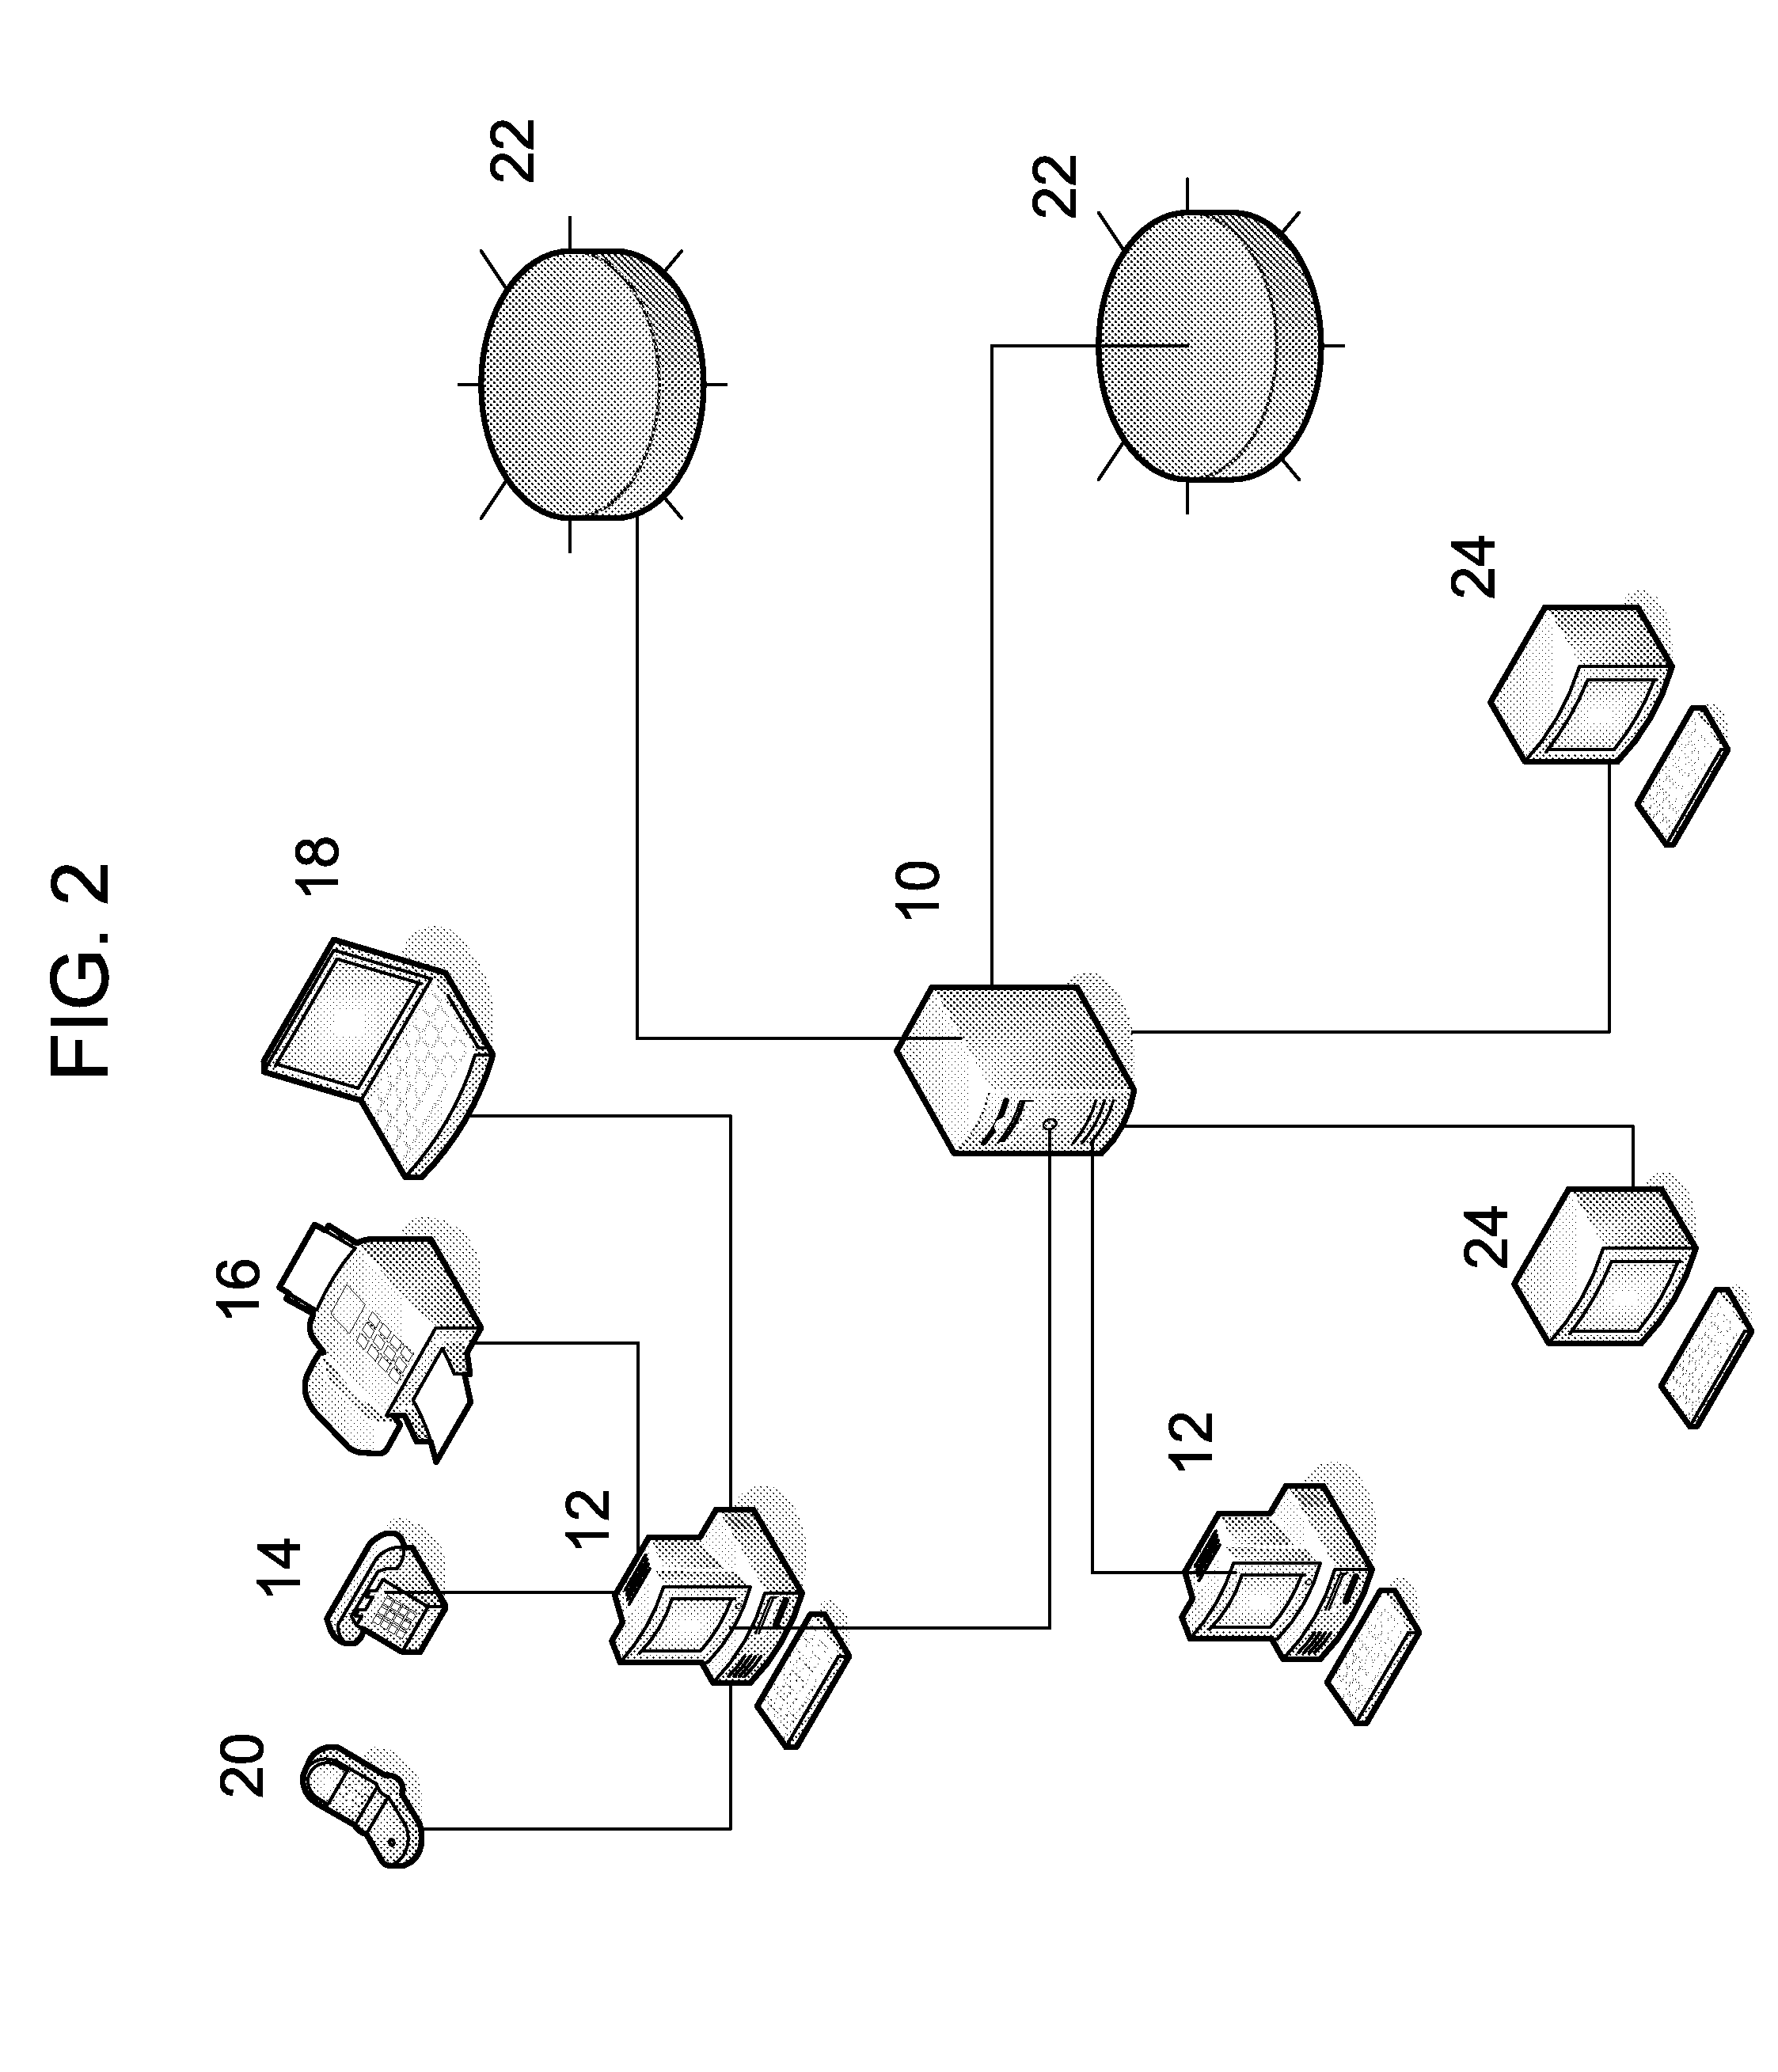 System and Method for Providing Dispute Resolution for Electronic Payment Transactions